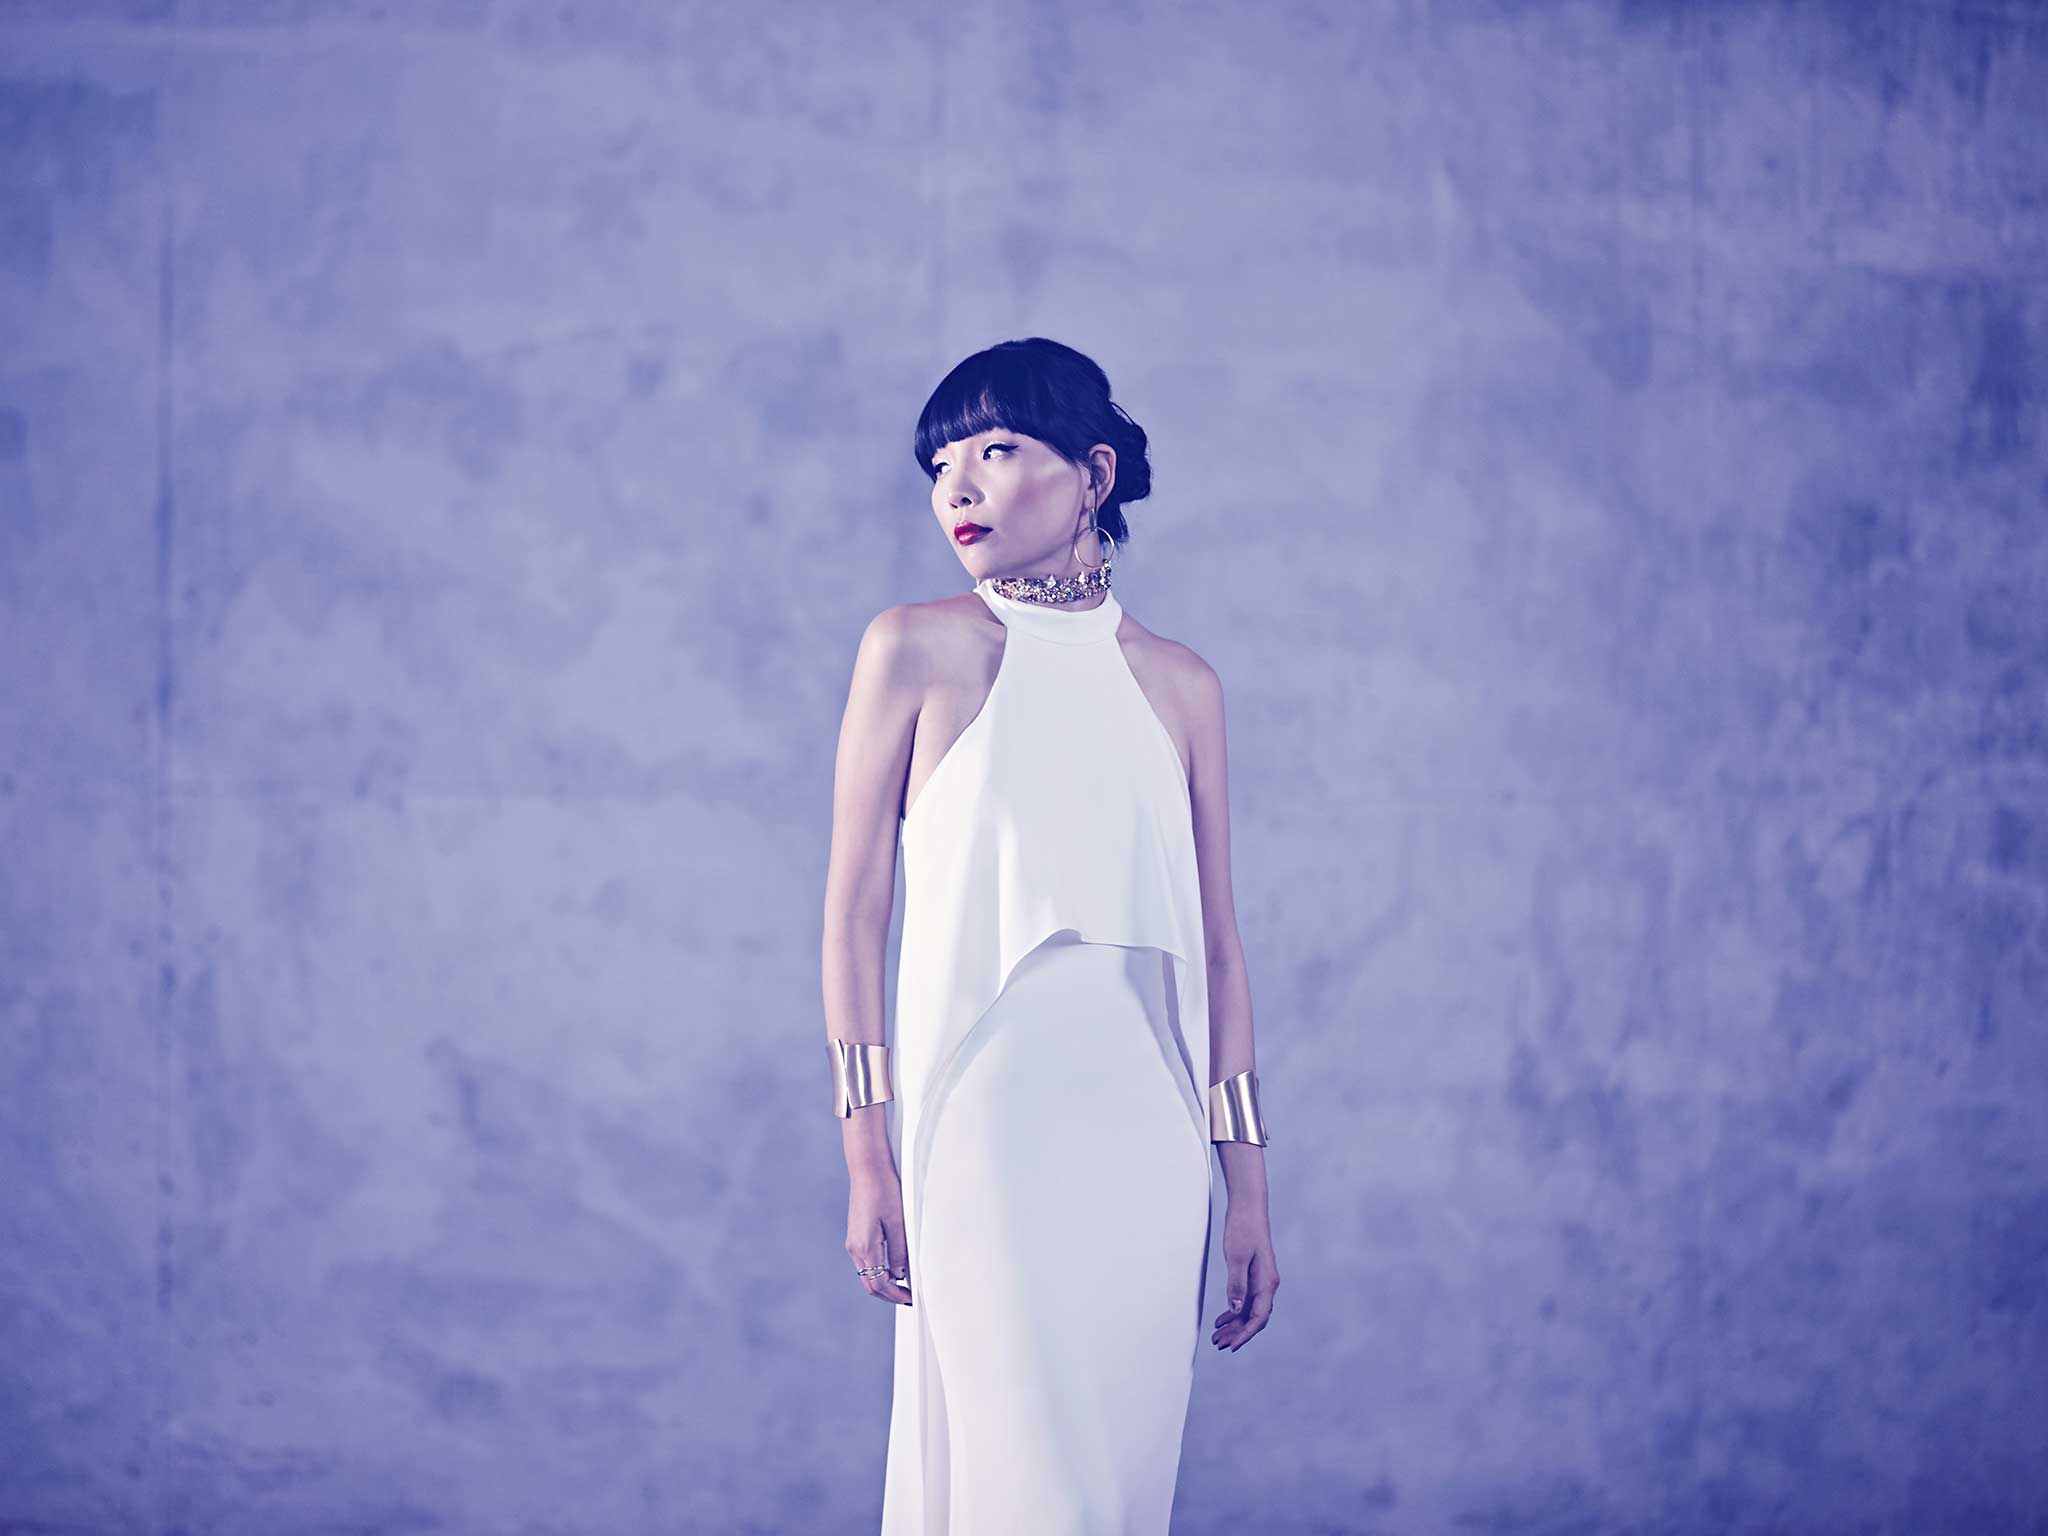 Dami Im will perform 'Sound of Silence' for Australia at Eurovision 2016